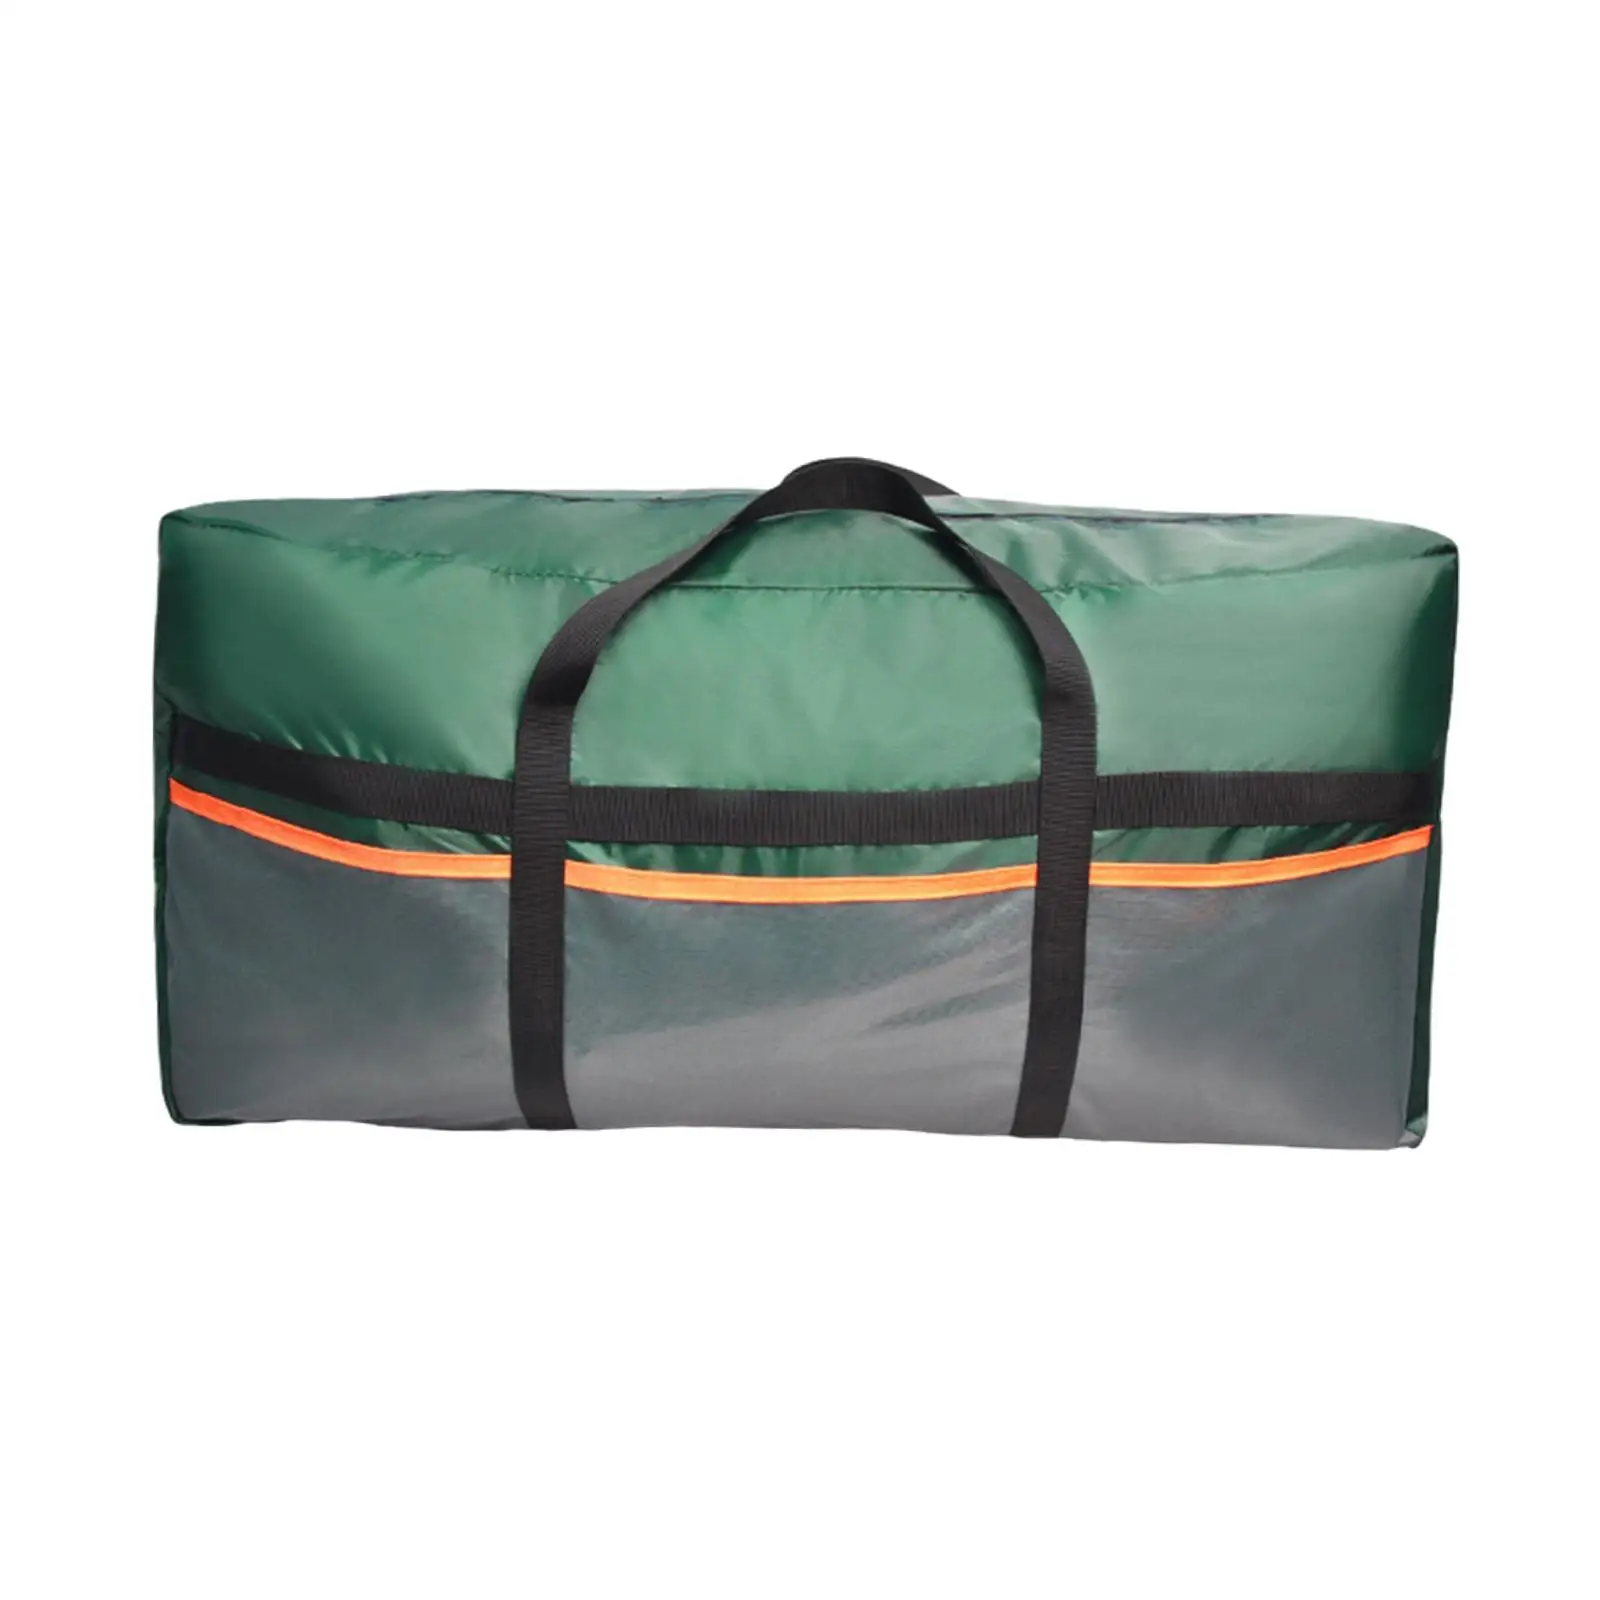 Tent Storage Bag Water Resistant Tote Bag Moving Clothes Bags Case High Capacity for Gardening Outdoor Beach Fishing Hiking